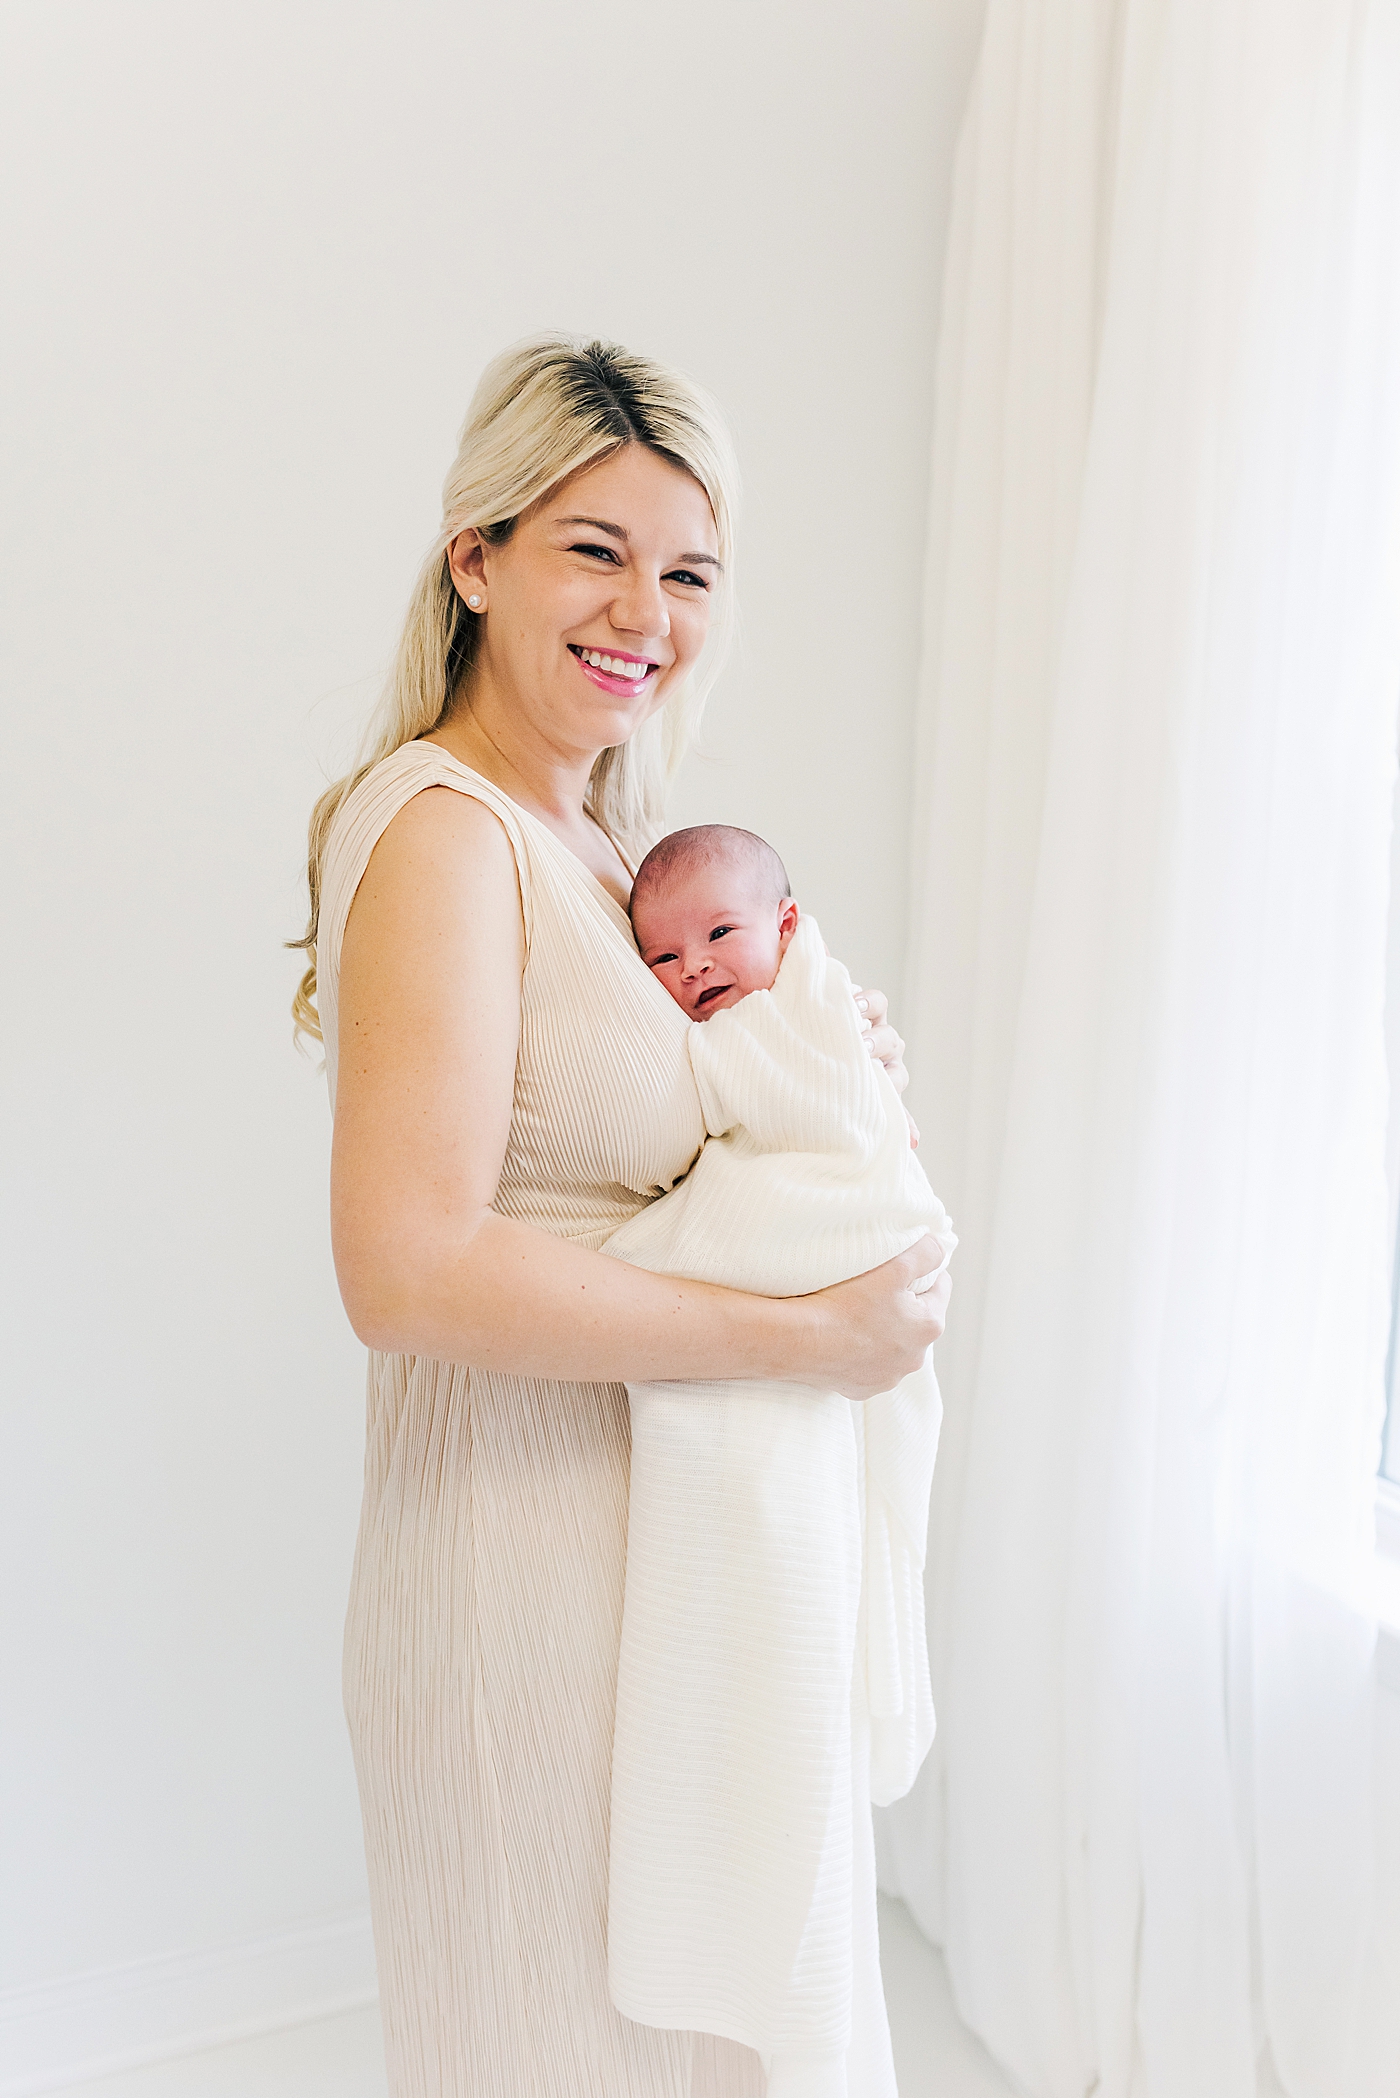 Mom smiling holding her new baby girl | Photo by Anna Wisjo Photography